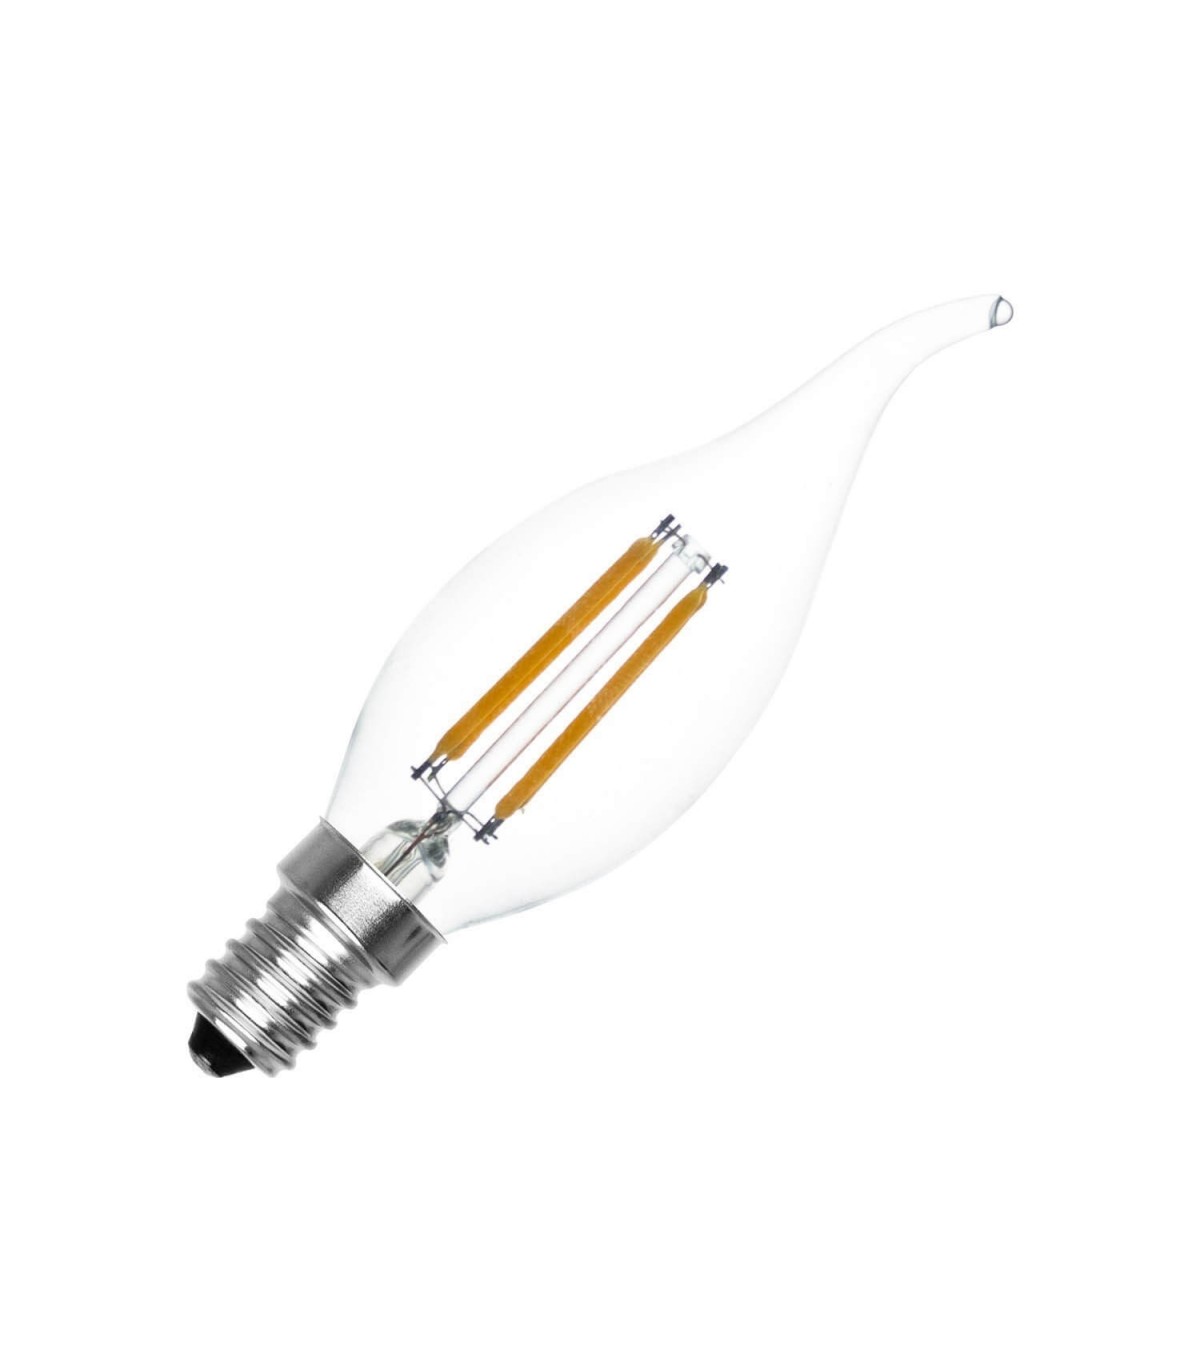 Ampoule LED LITED flamme C35F 4W substitut 35W 380 lumens blanc